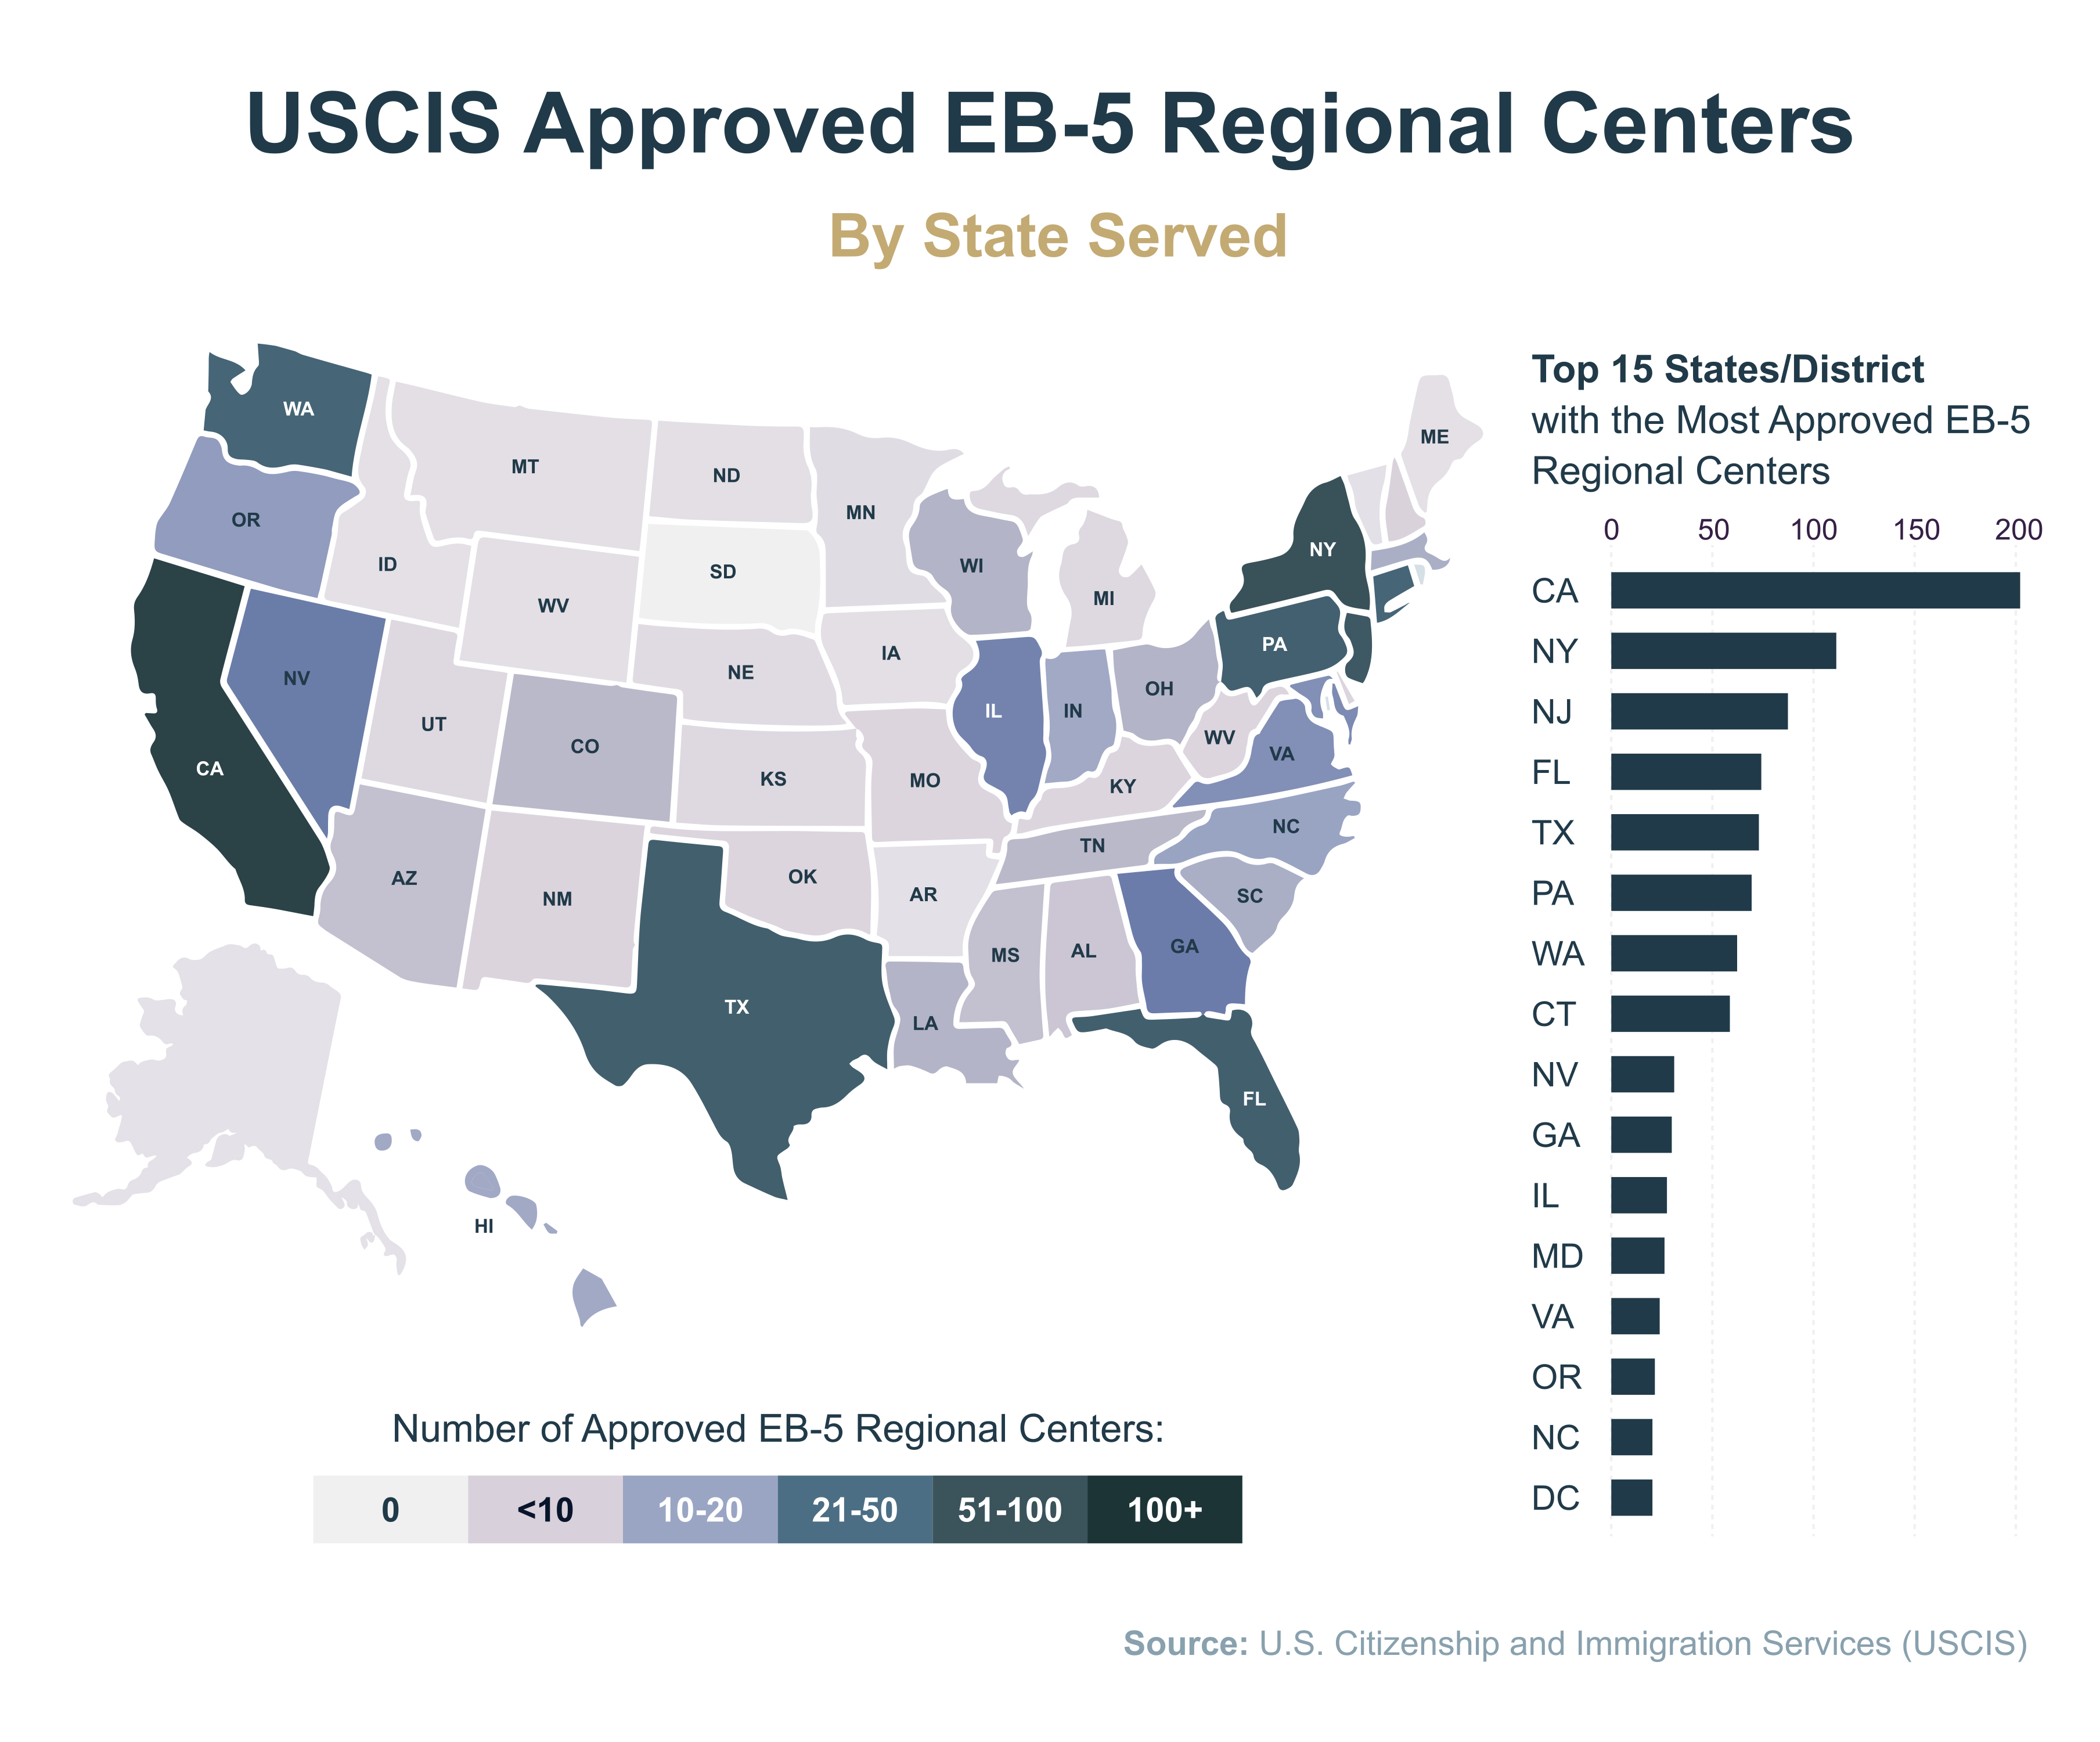 USCIS Approved EB-5 Regional Centers